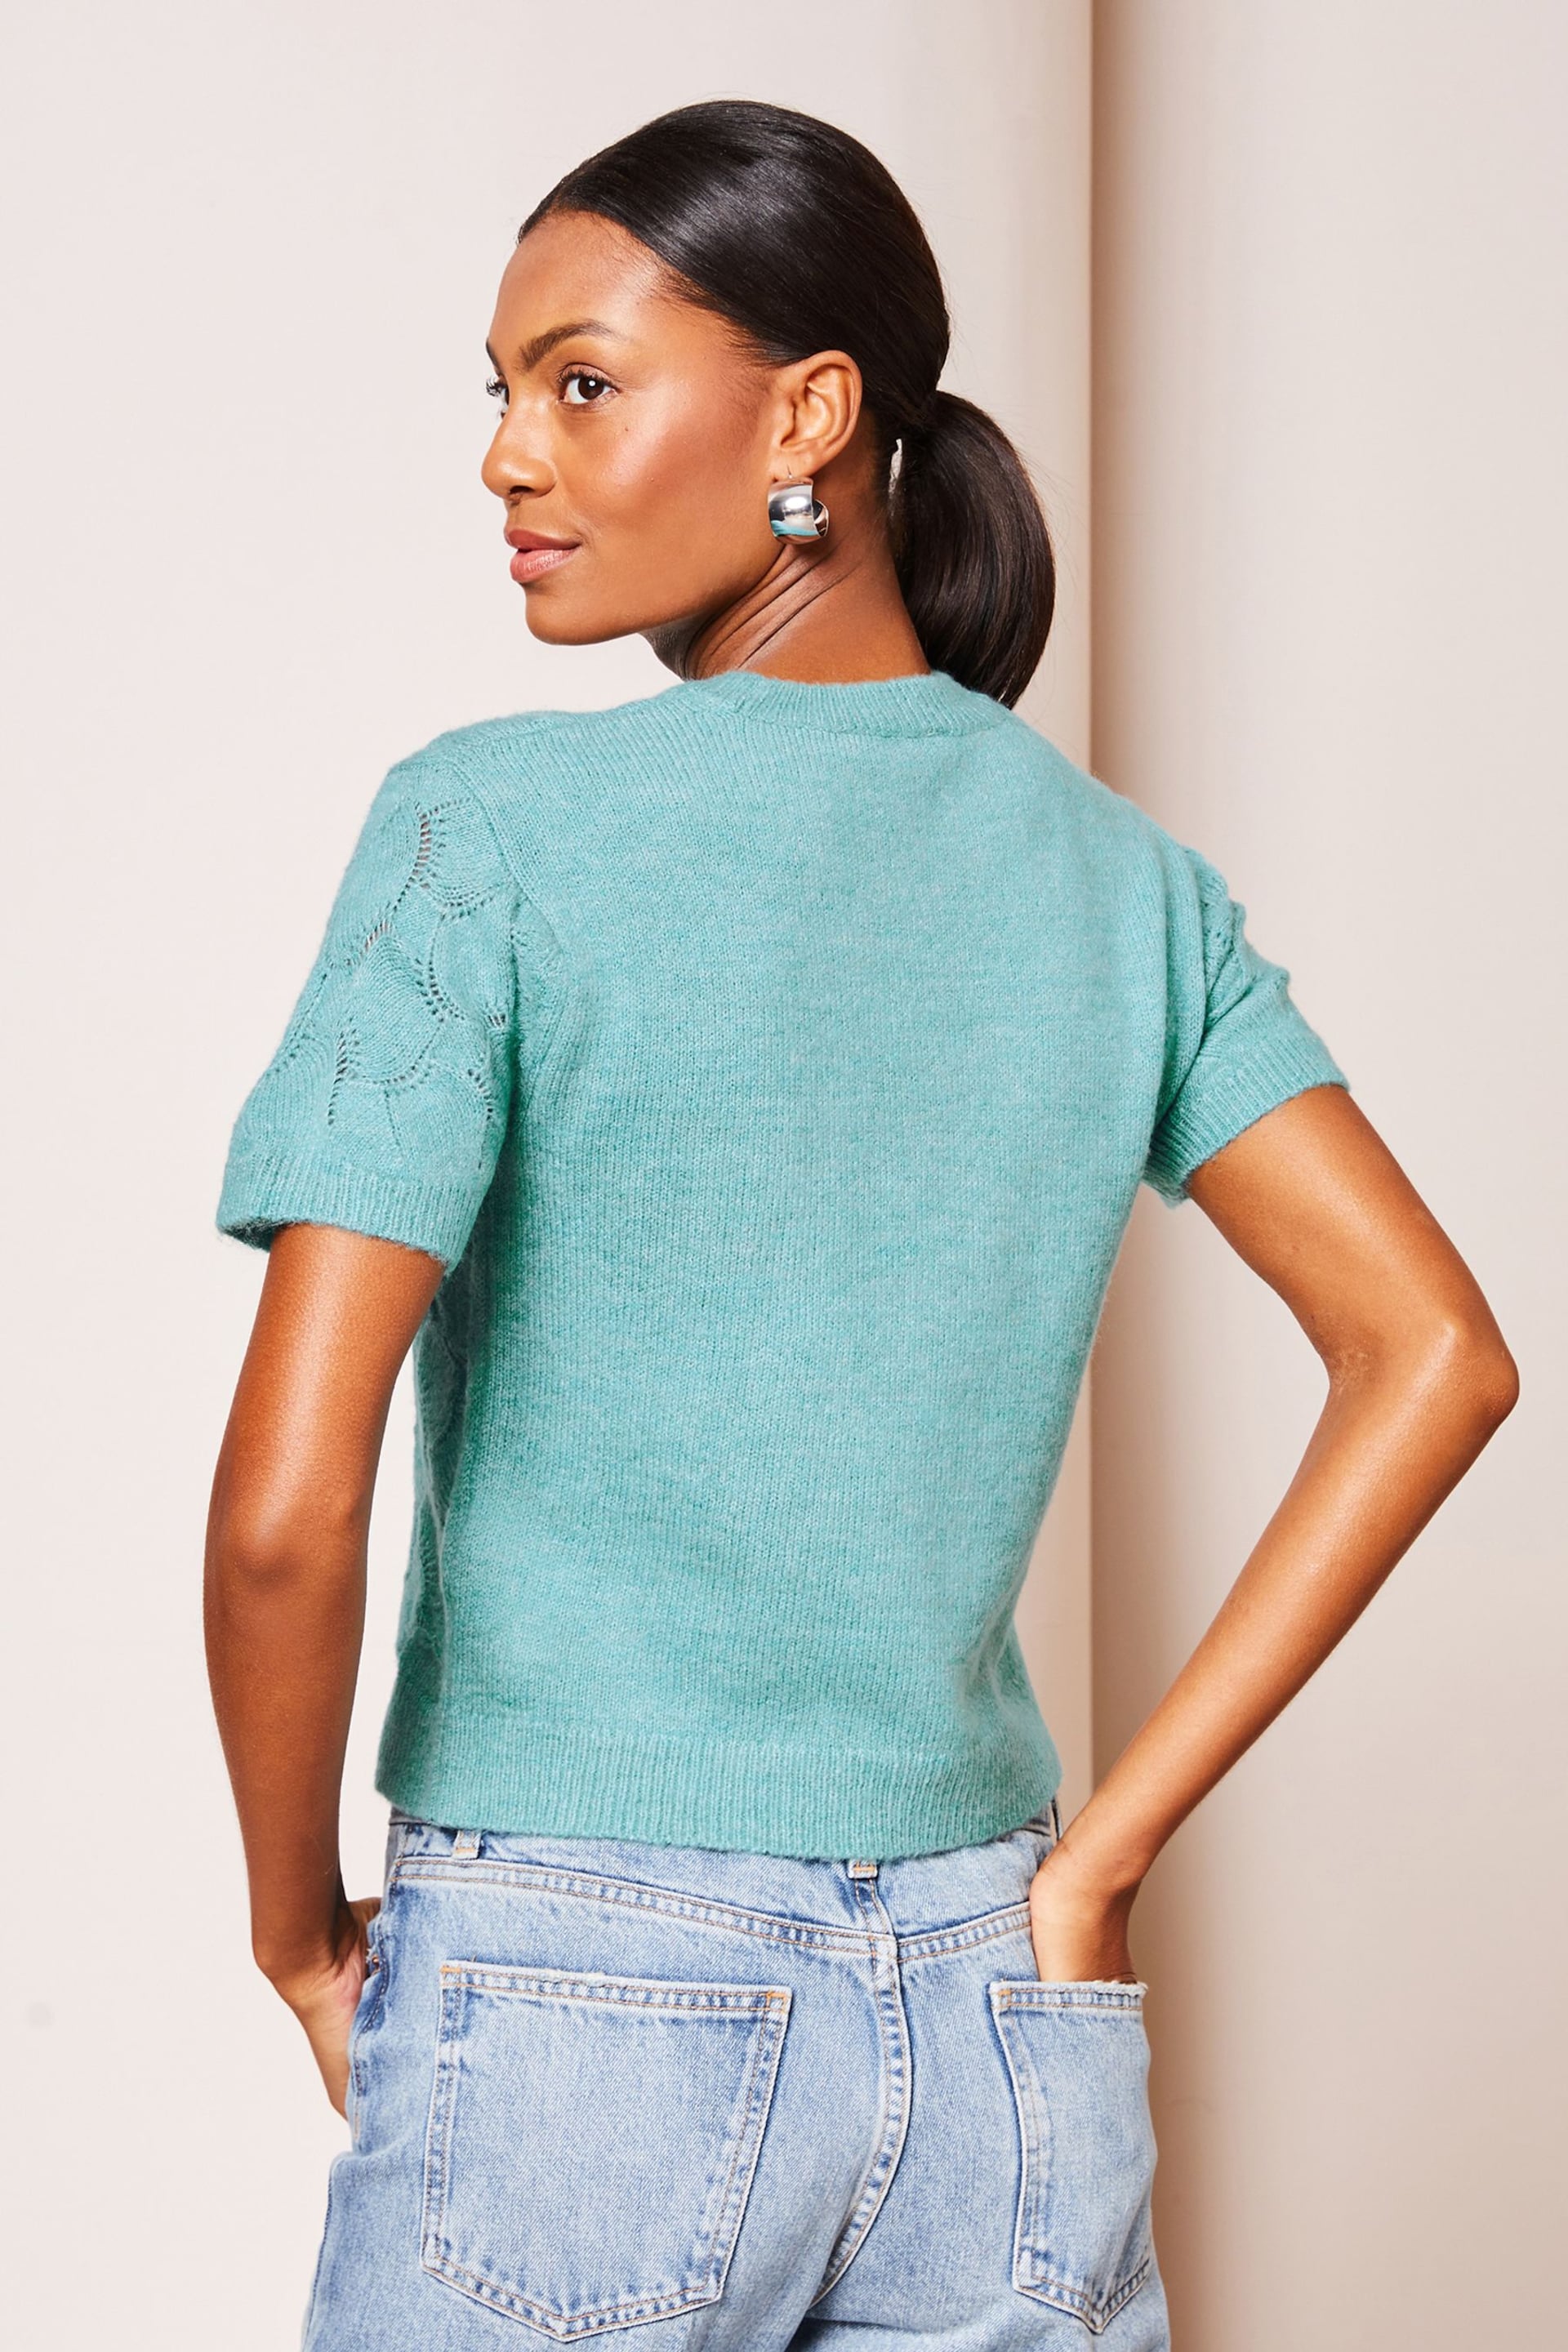 Lipsy Teal Blue Short Sleeve Patterned Knit Top - Image 2 of 4